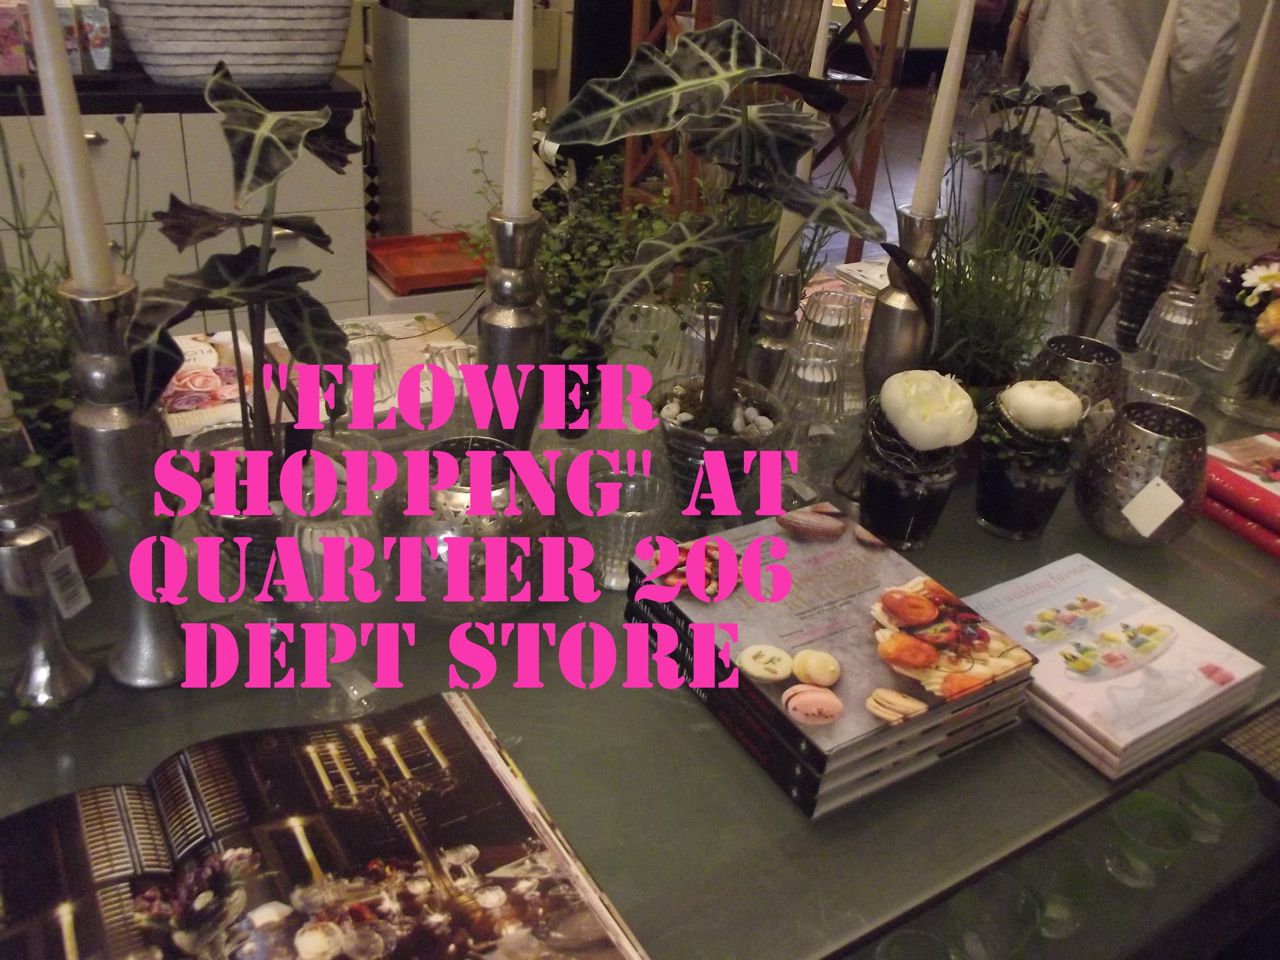 You are currently viewing <!--:en--> “Flowers”Discovering Quartier 206 Department Store’s Flower Shop<!--:-->